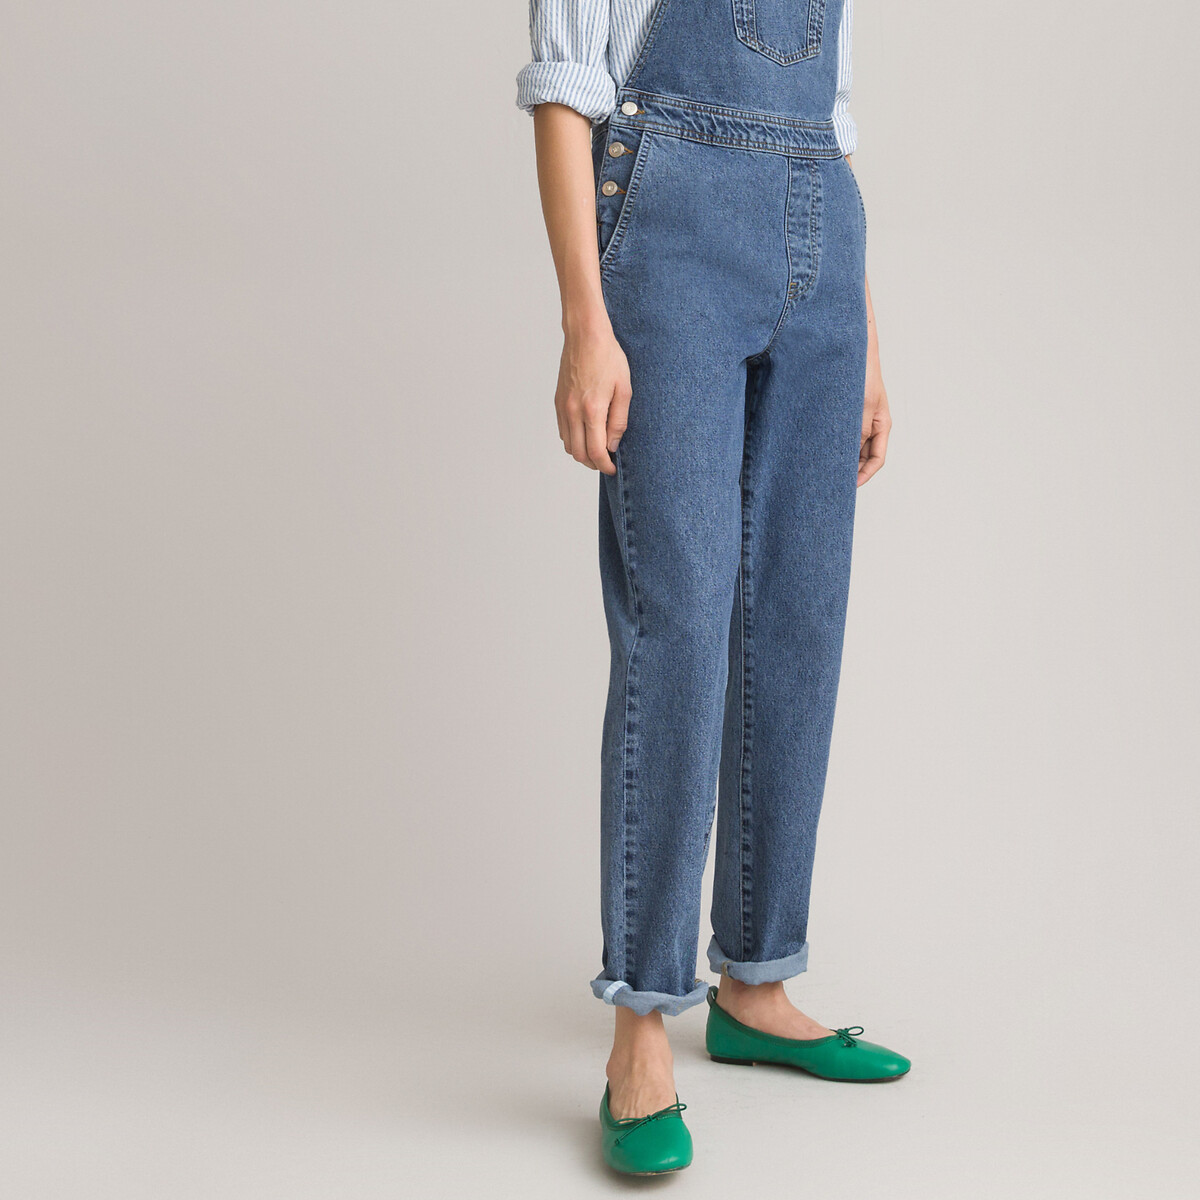 Over 40 Fashion Blog: Classic Denim Dungarees and Patterned Bow Blouse, La  Redoute Brand Ambassador Post